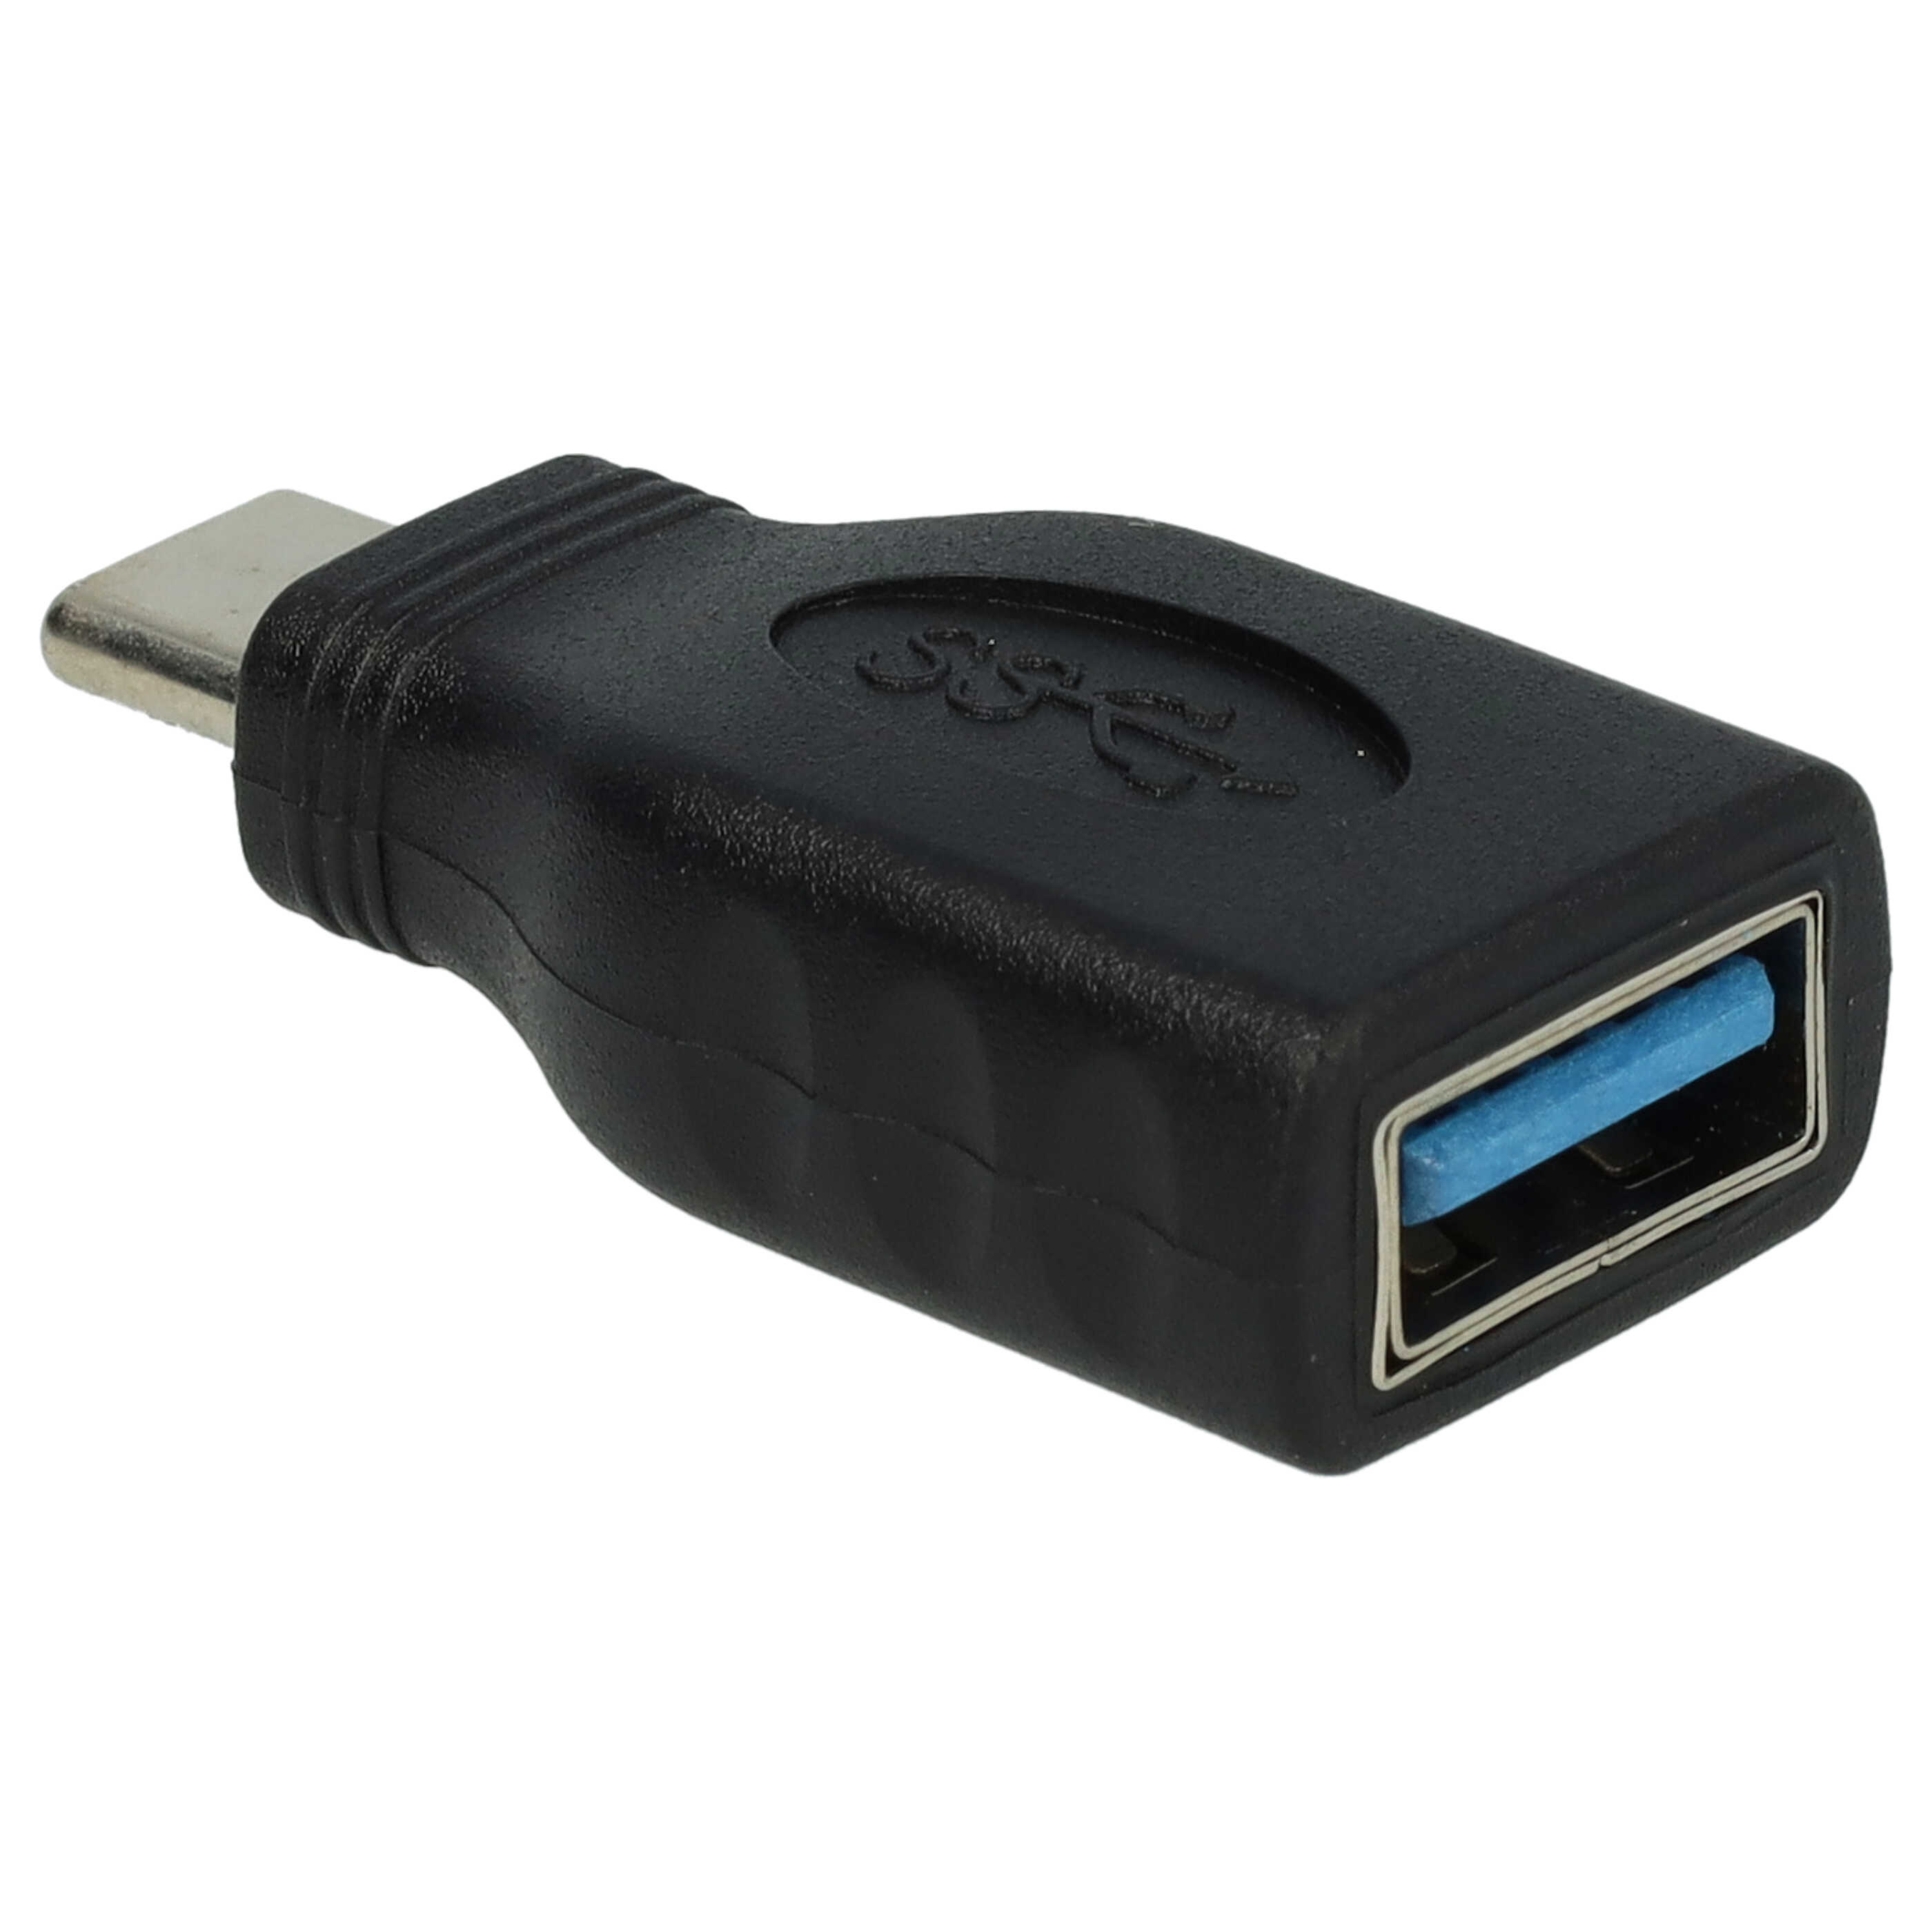 Adapter USB Type C to USB 3.0 suitable for Liquid Jade Primo Acer - USB Adapter Black